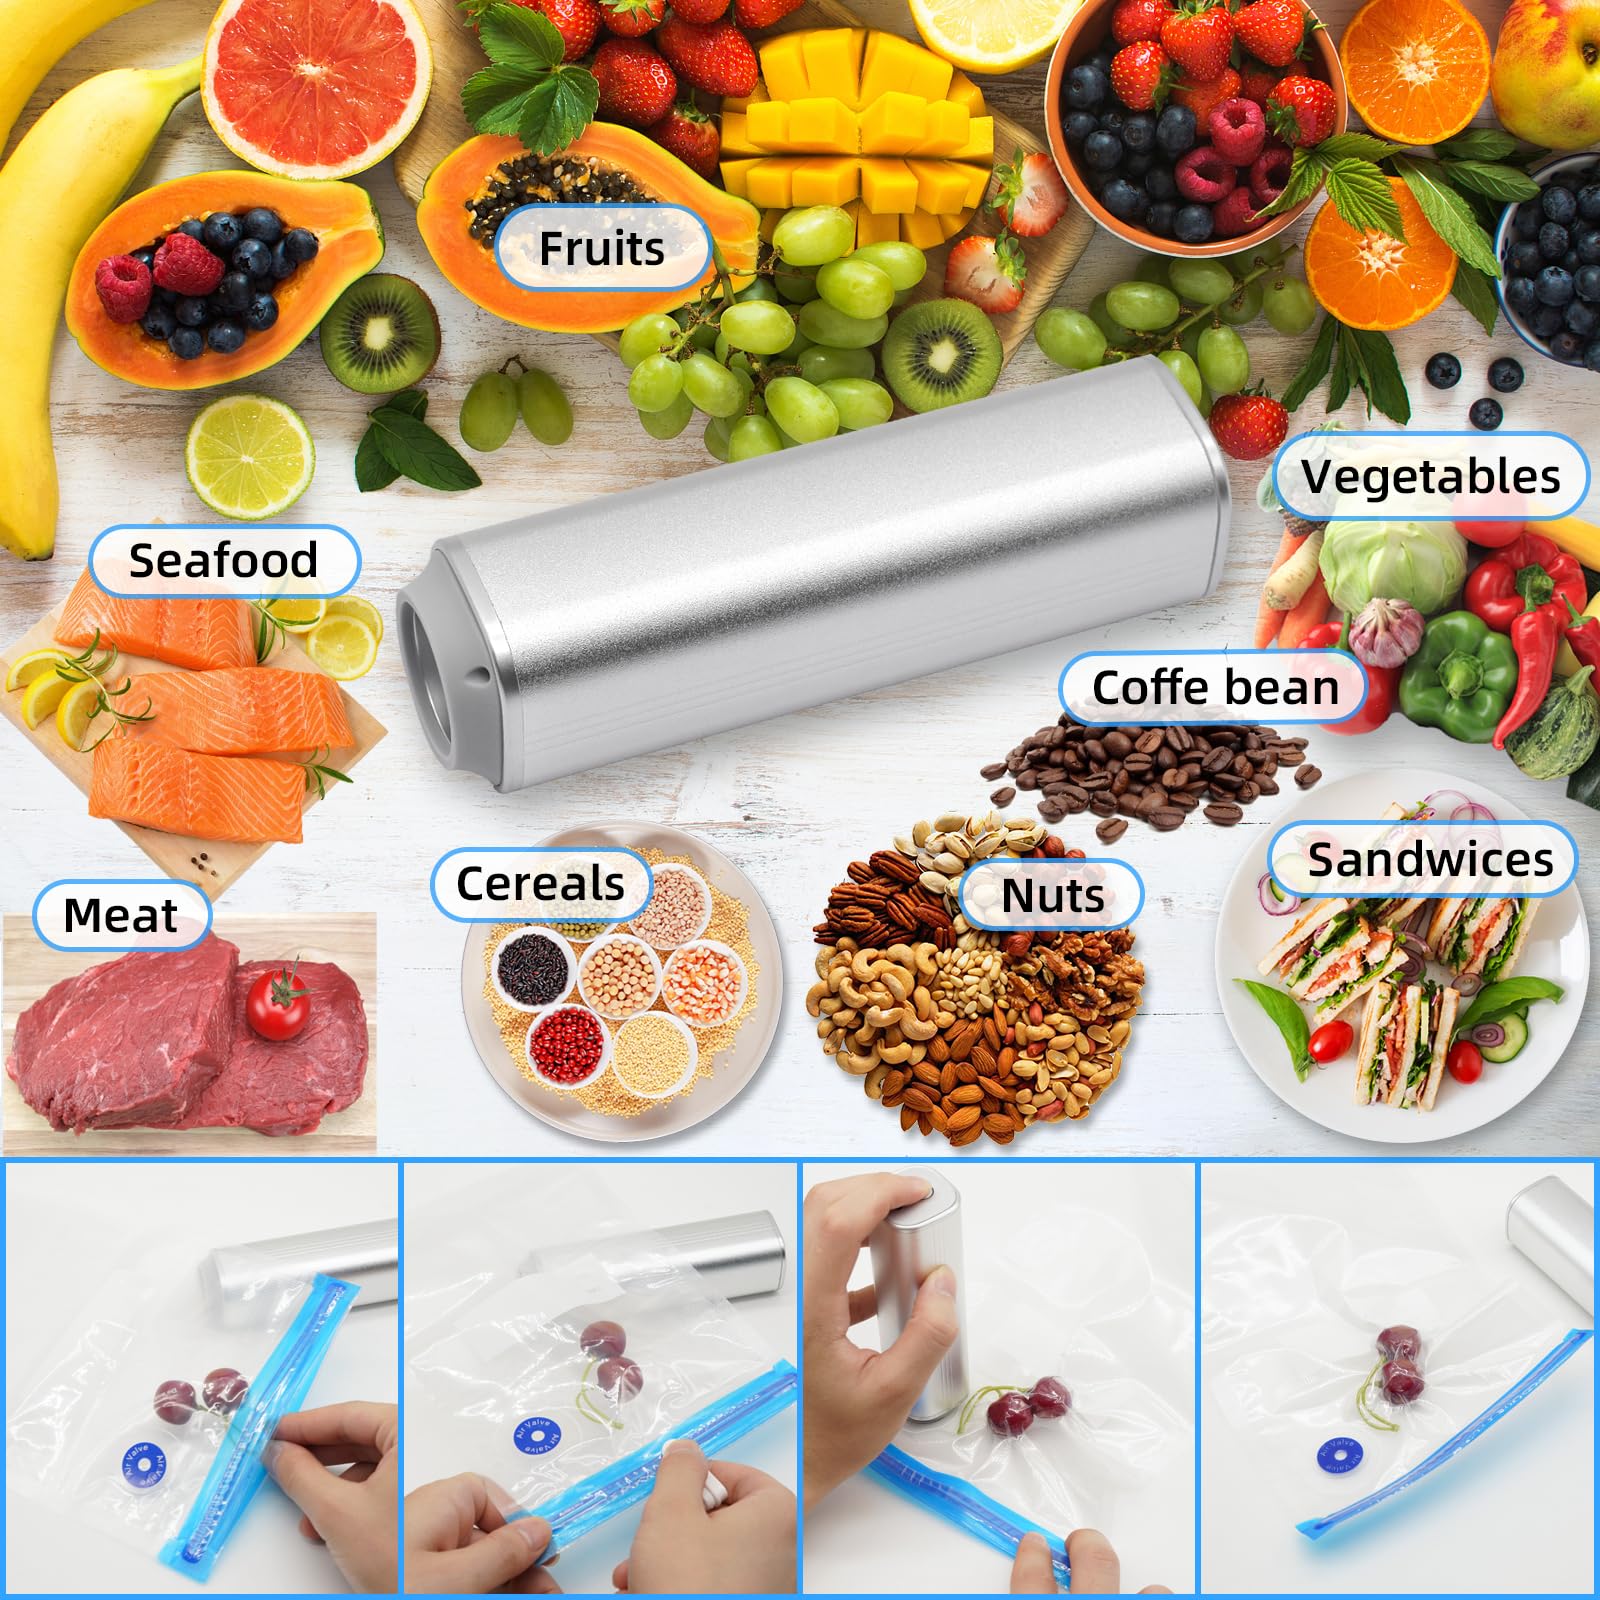 Electric Vacuum Sealer Machine，Mini Handheld Vacuum Sealer，with 5 Reusable Zipper Vacuum Bags and 2 Cooking Clips for Food Storage and Sous Vide Cooking